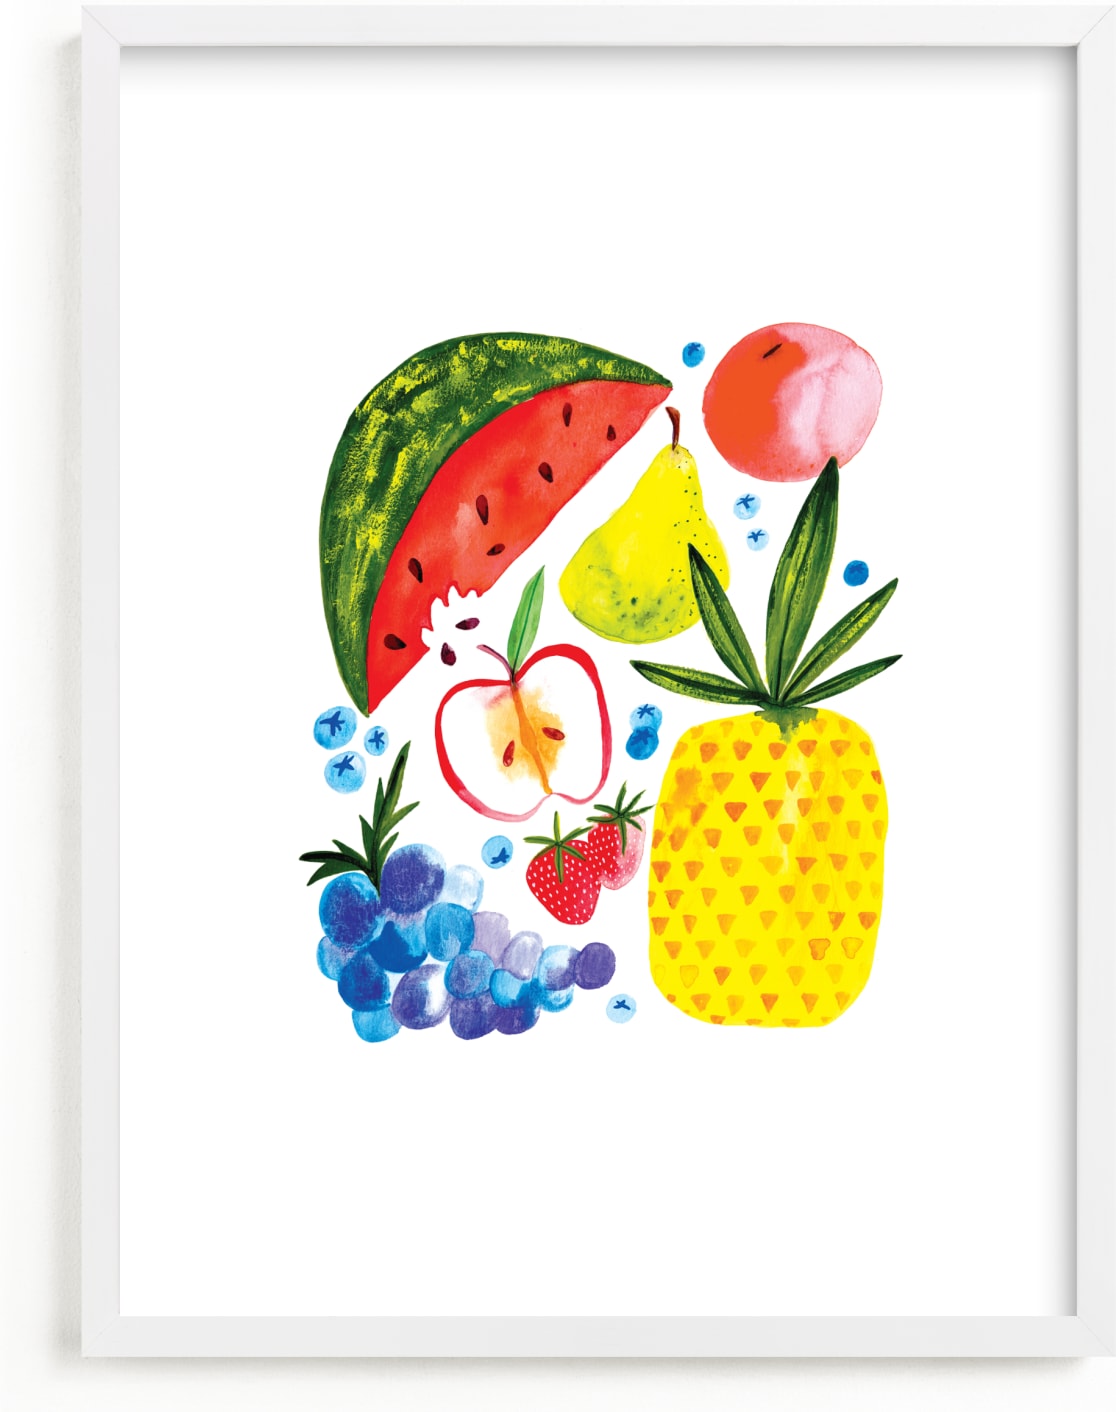 This is a colorful, classic colors, yellow kids wall art by Patrice Horvath called Fruit Family.